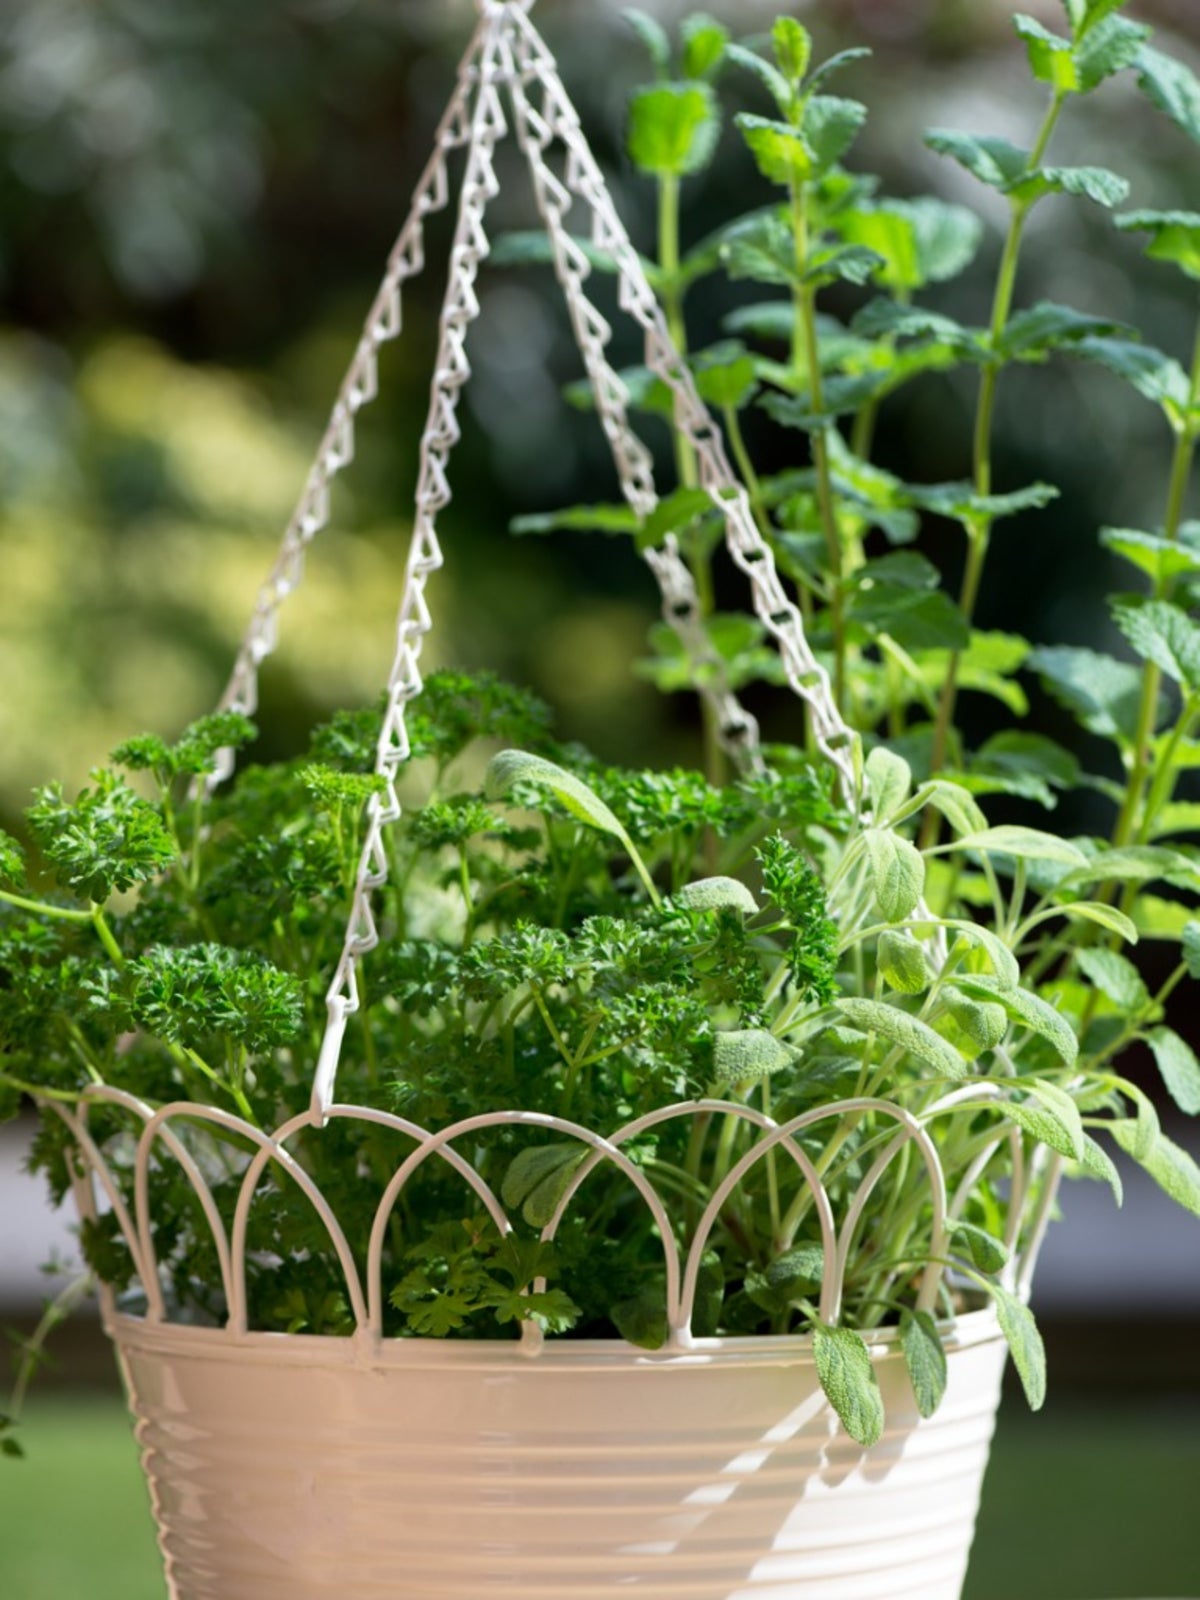 What can I hang instead of hanging baskets